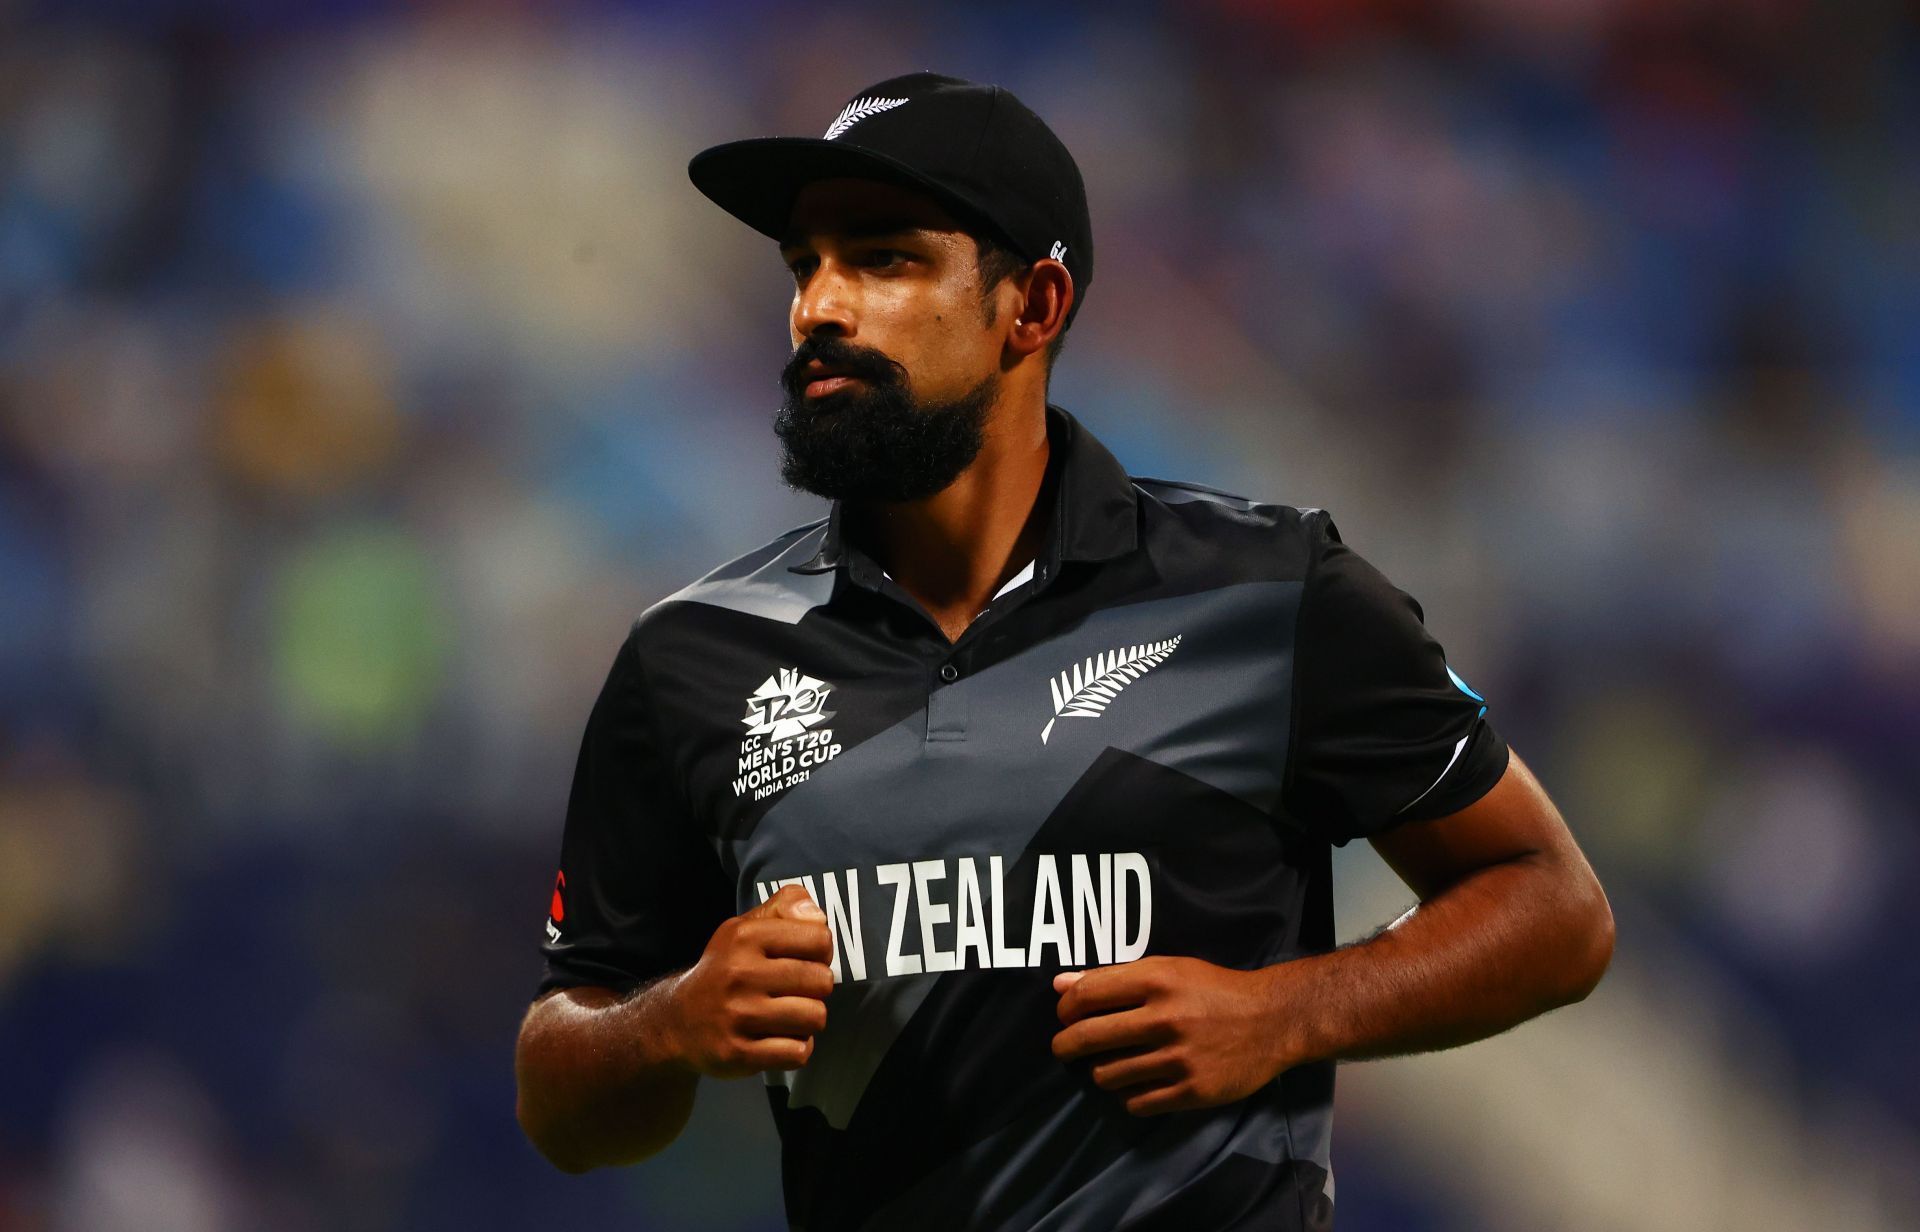 Ish Sodhi is an attacking leg-spinner